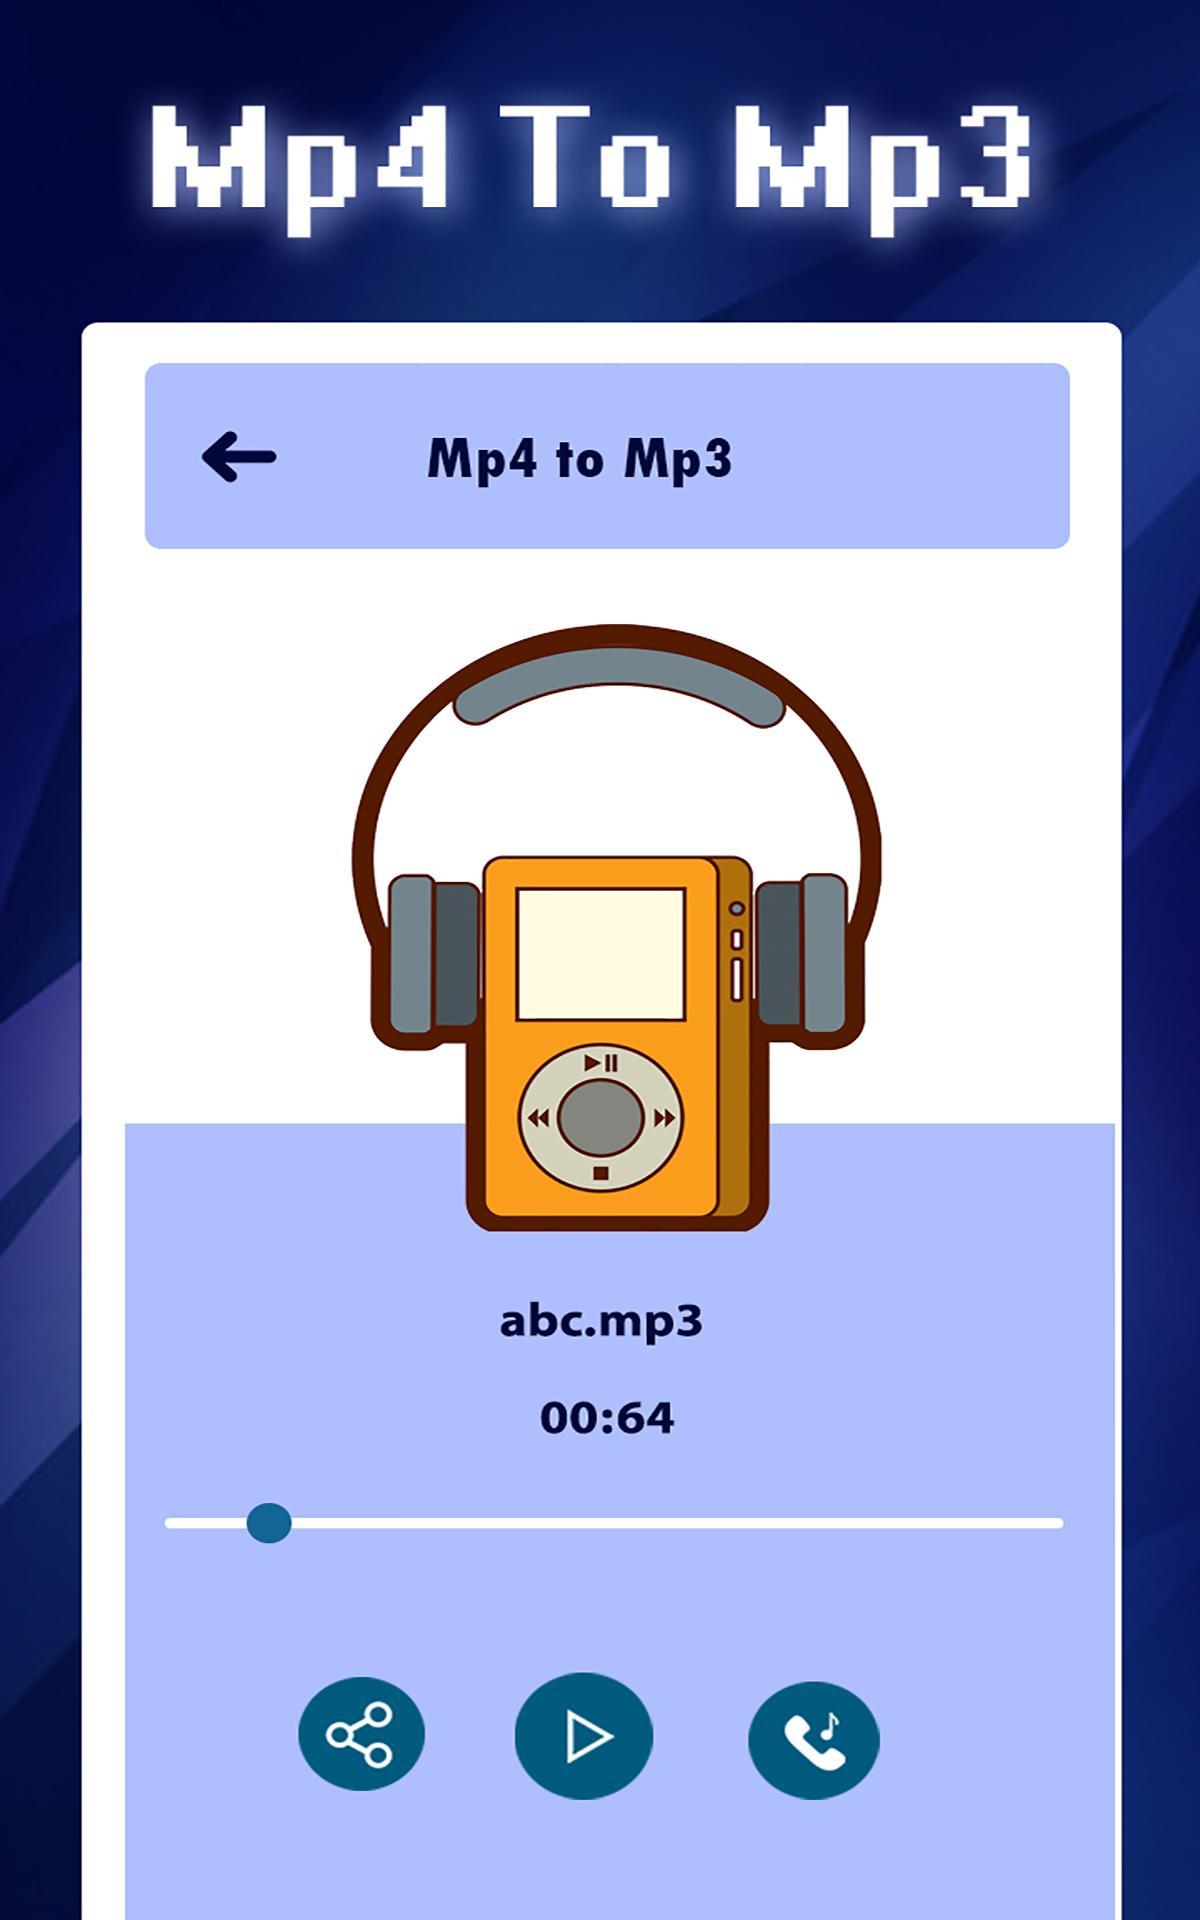 Mp4 to Mp3 - Convert Video to Audio for Android - APK Download